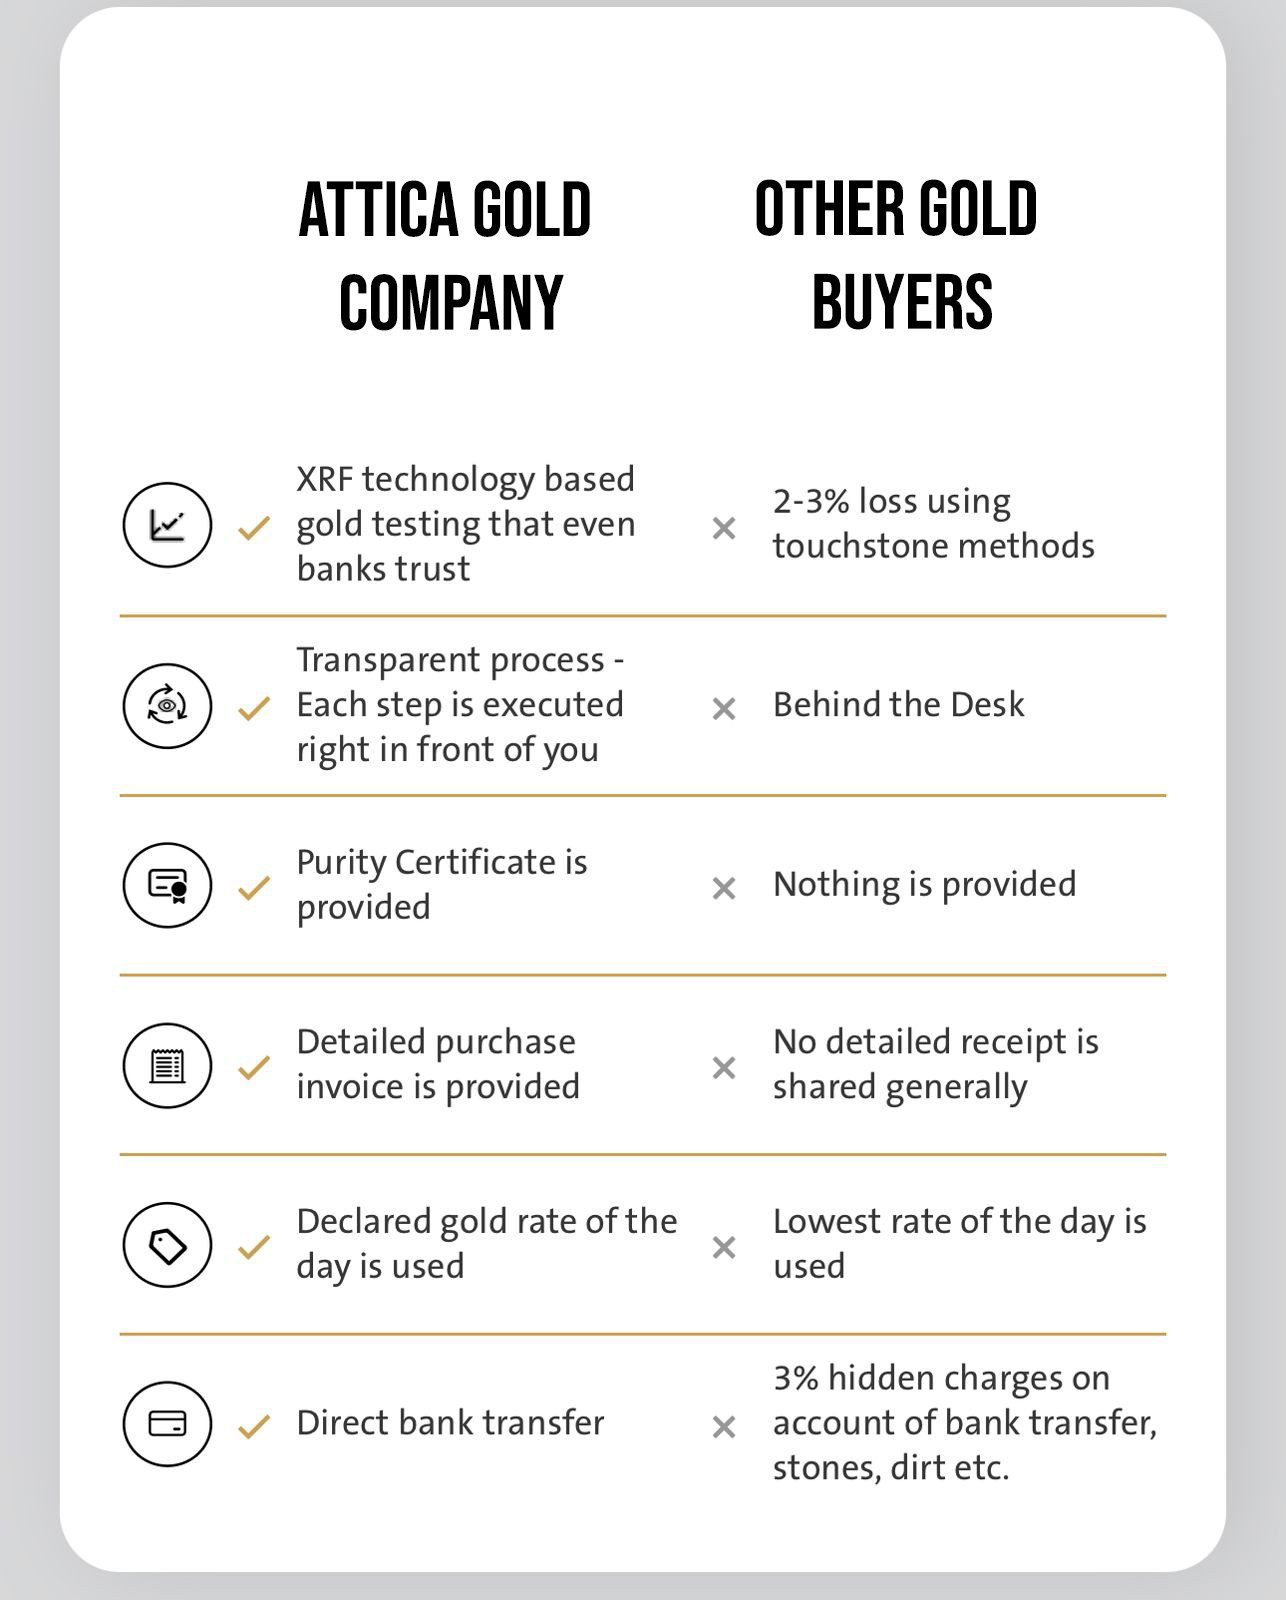 KNOW PROCESS BEFORE SELLING GOLD JEWELLERY